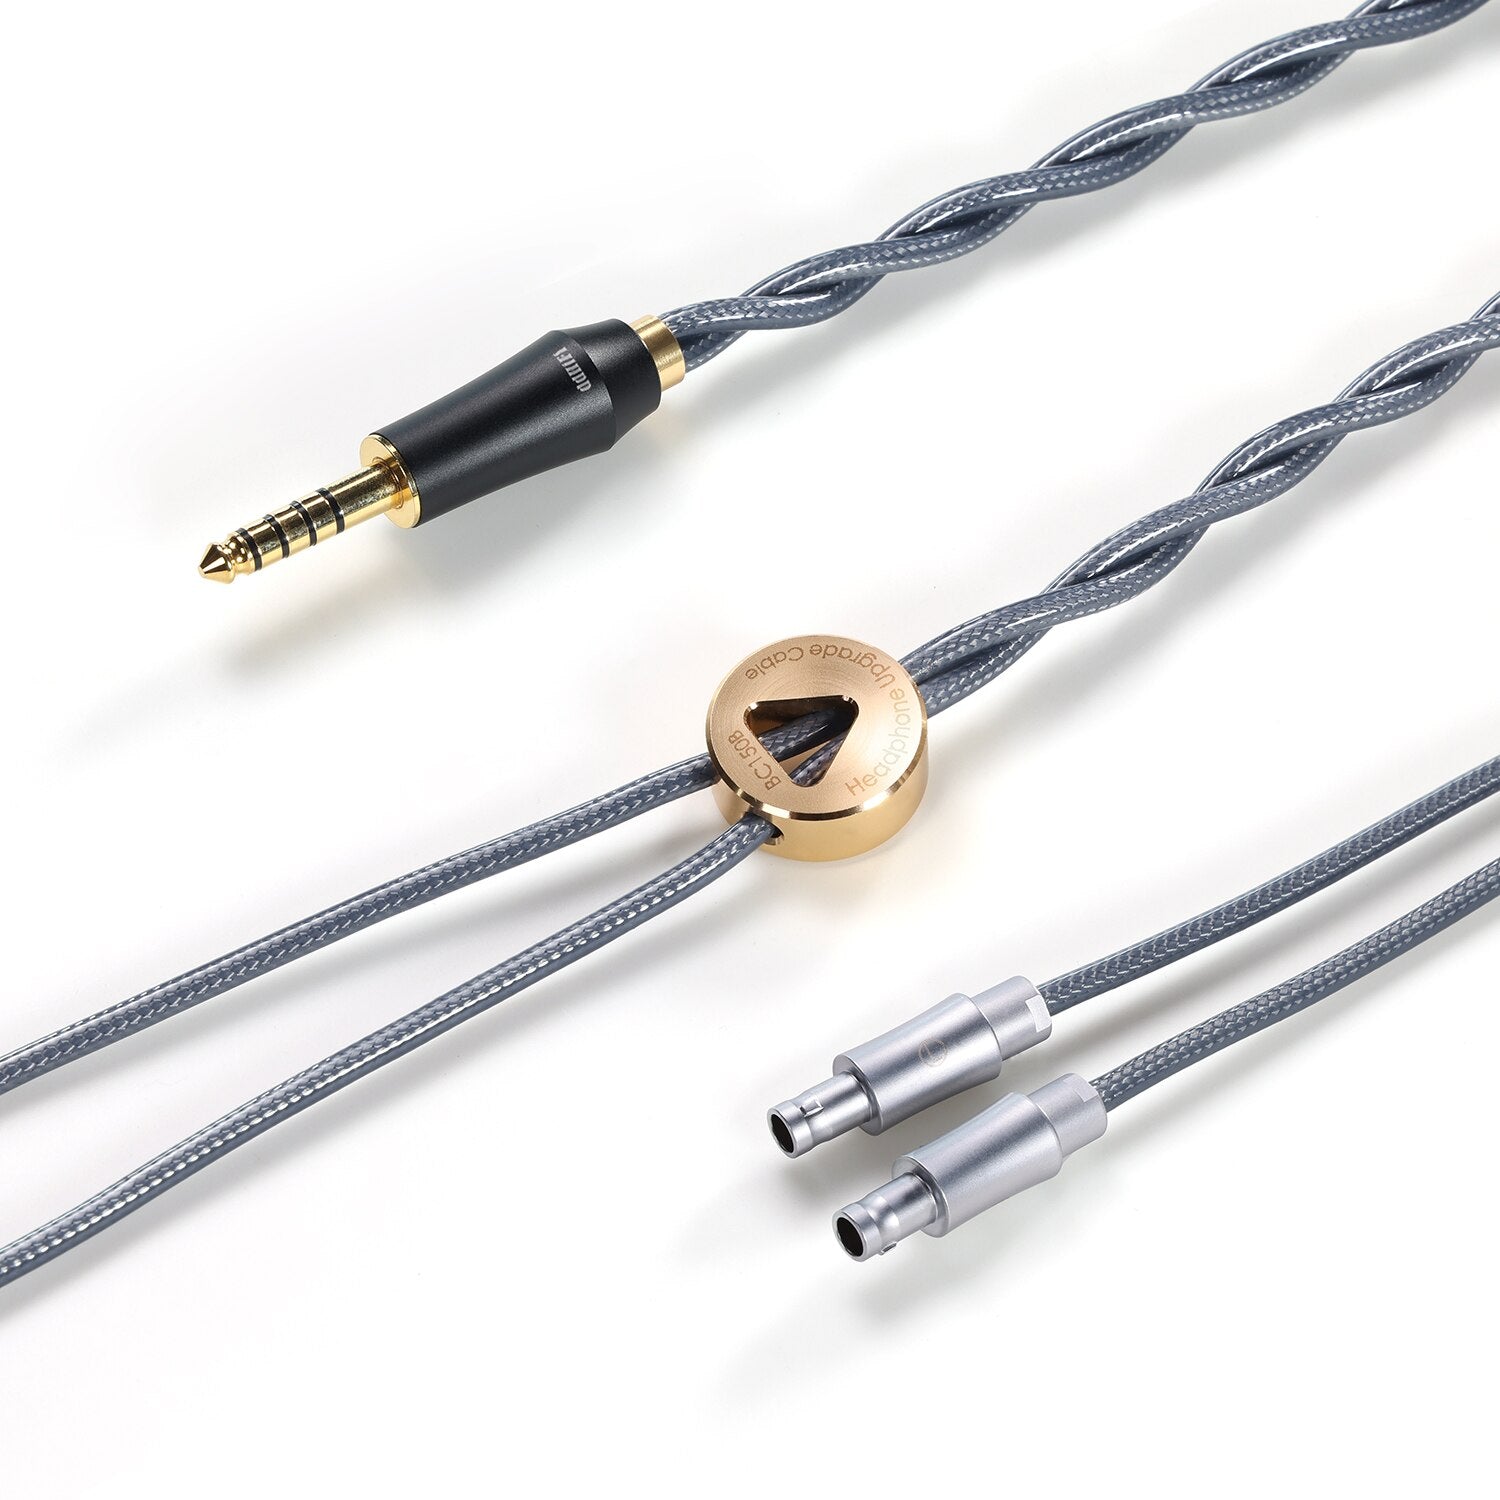 ddHiFi BC150B Double Shielded Earphone Upgrade Cable - The HiFi Cat